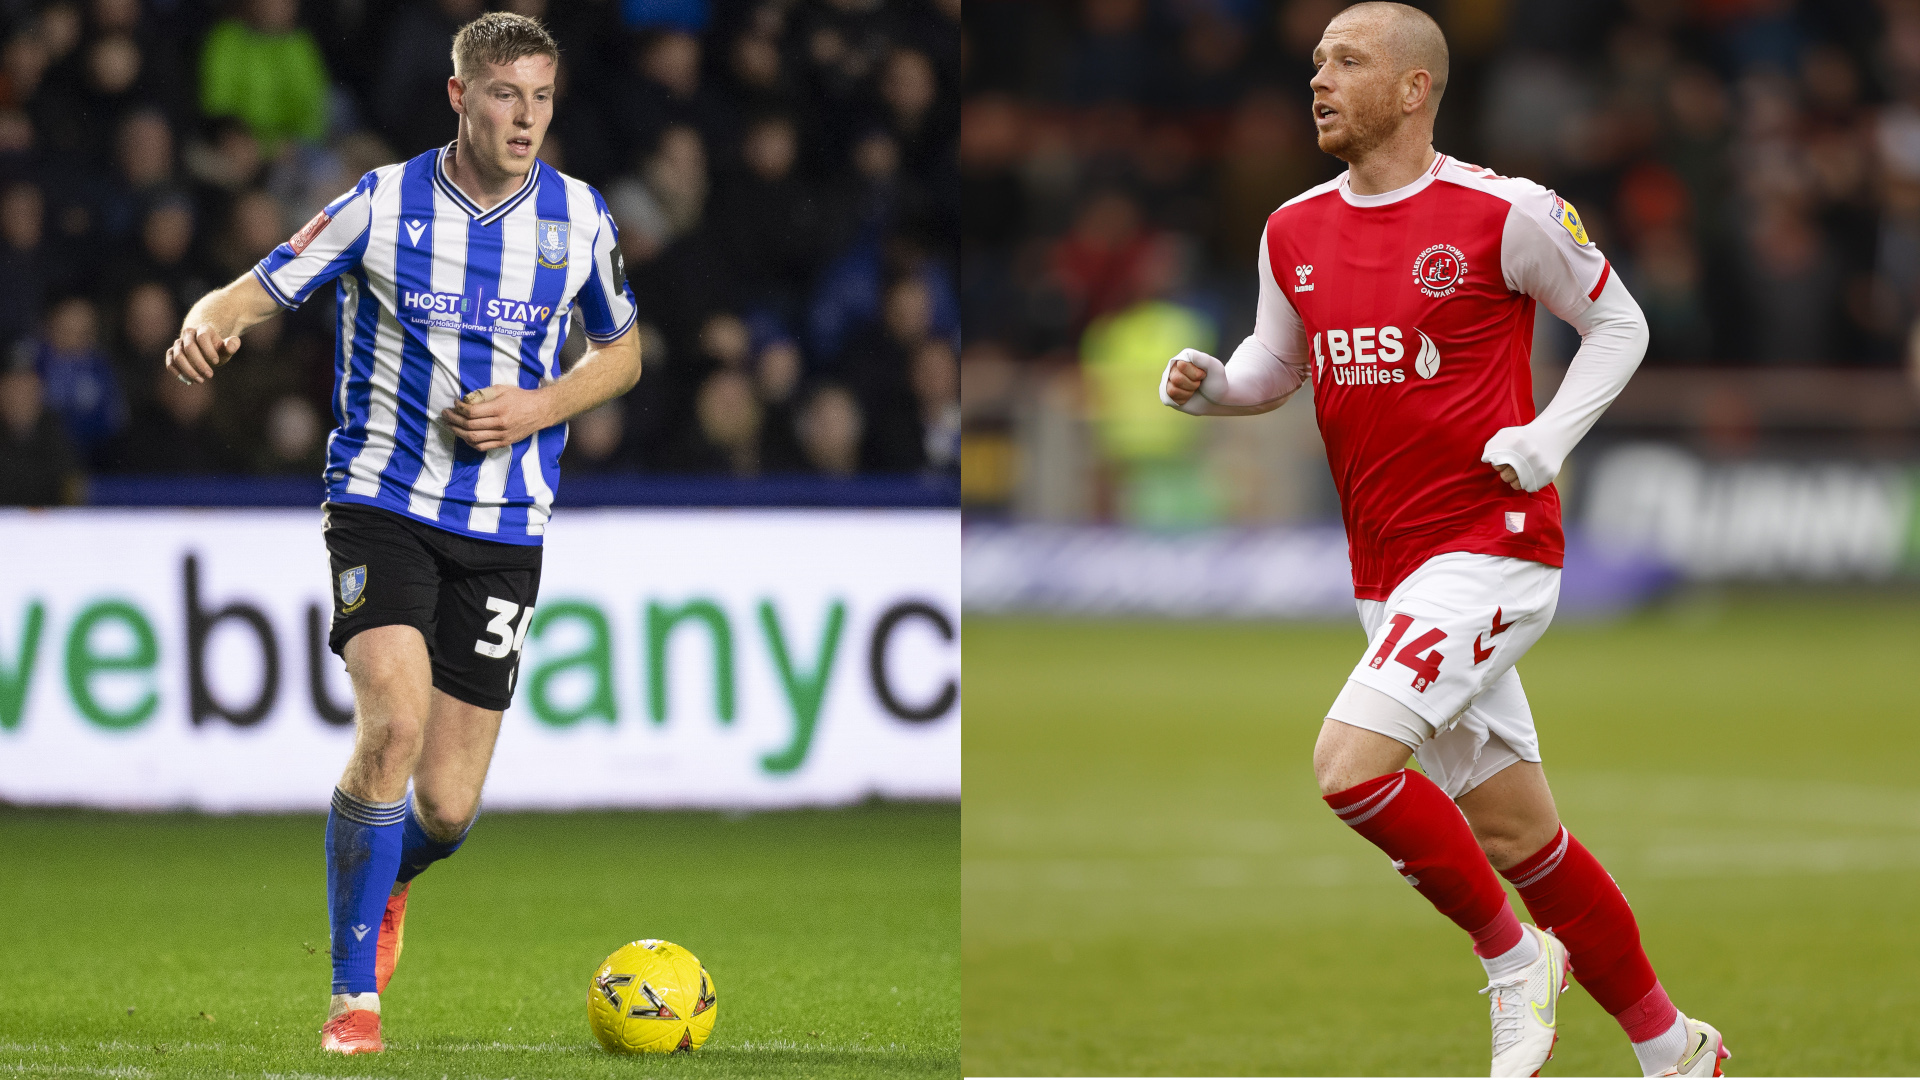 Sheffield Wednesday vs Fleetwood Town live stream how to watch FA Cup fourth round online and on TV, team news TechRadar